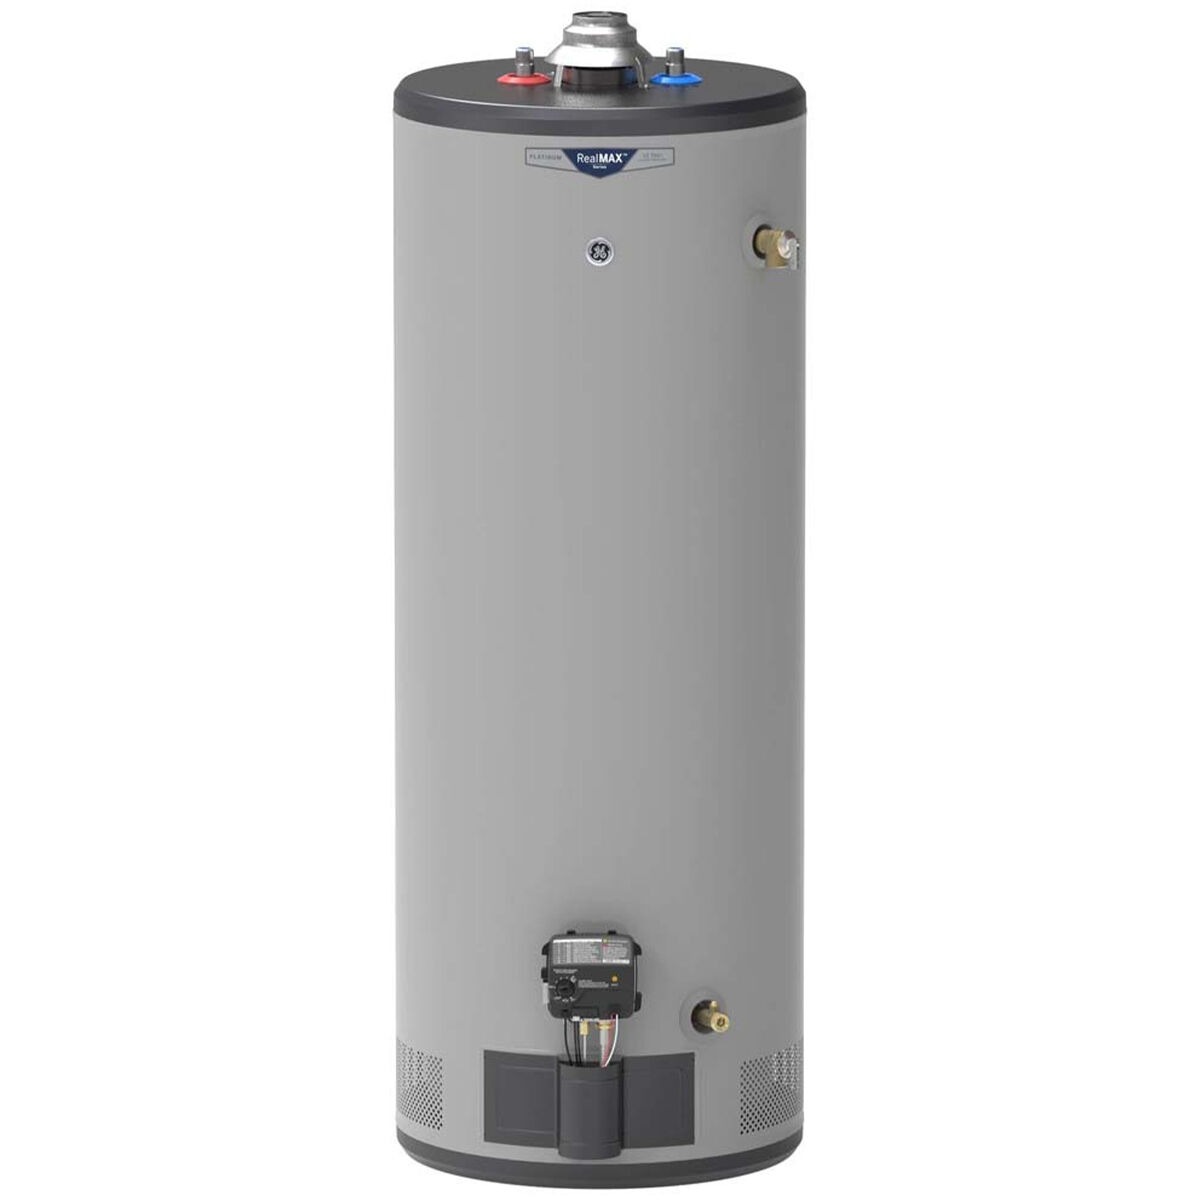 GE RealMax Platinum Natural Gas 50 Gallon Tall Water Heater with